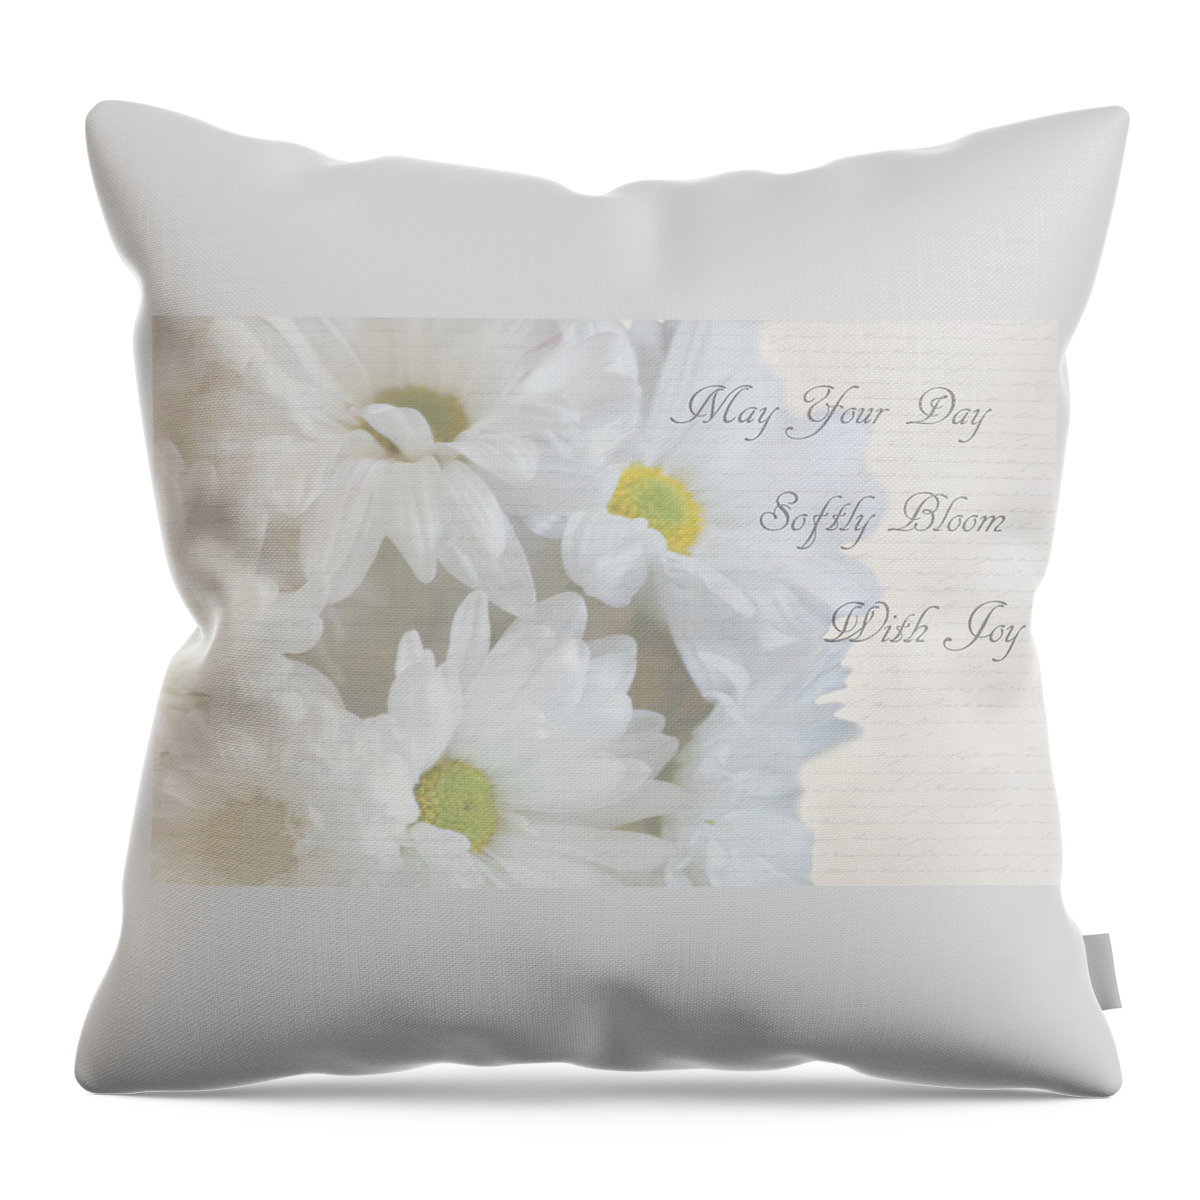 Daisies Throw Pillow featuring the photograph Blooming Daisies by Linda Segerson